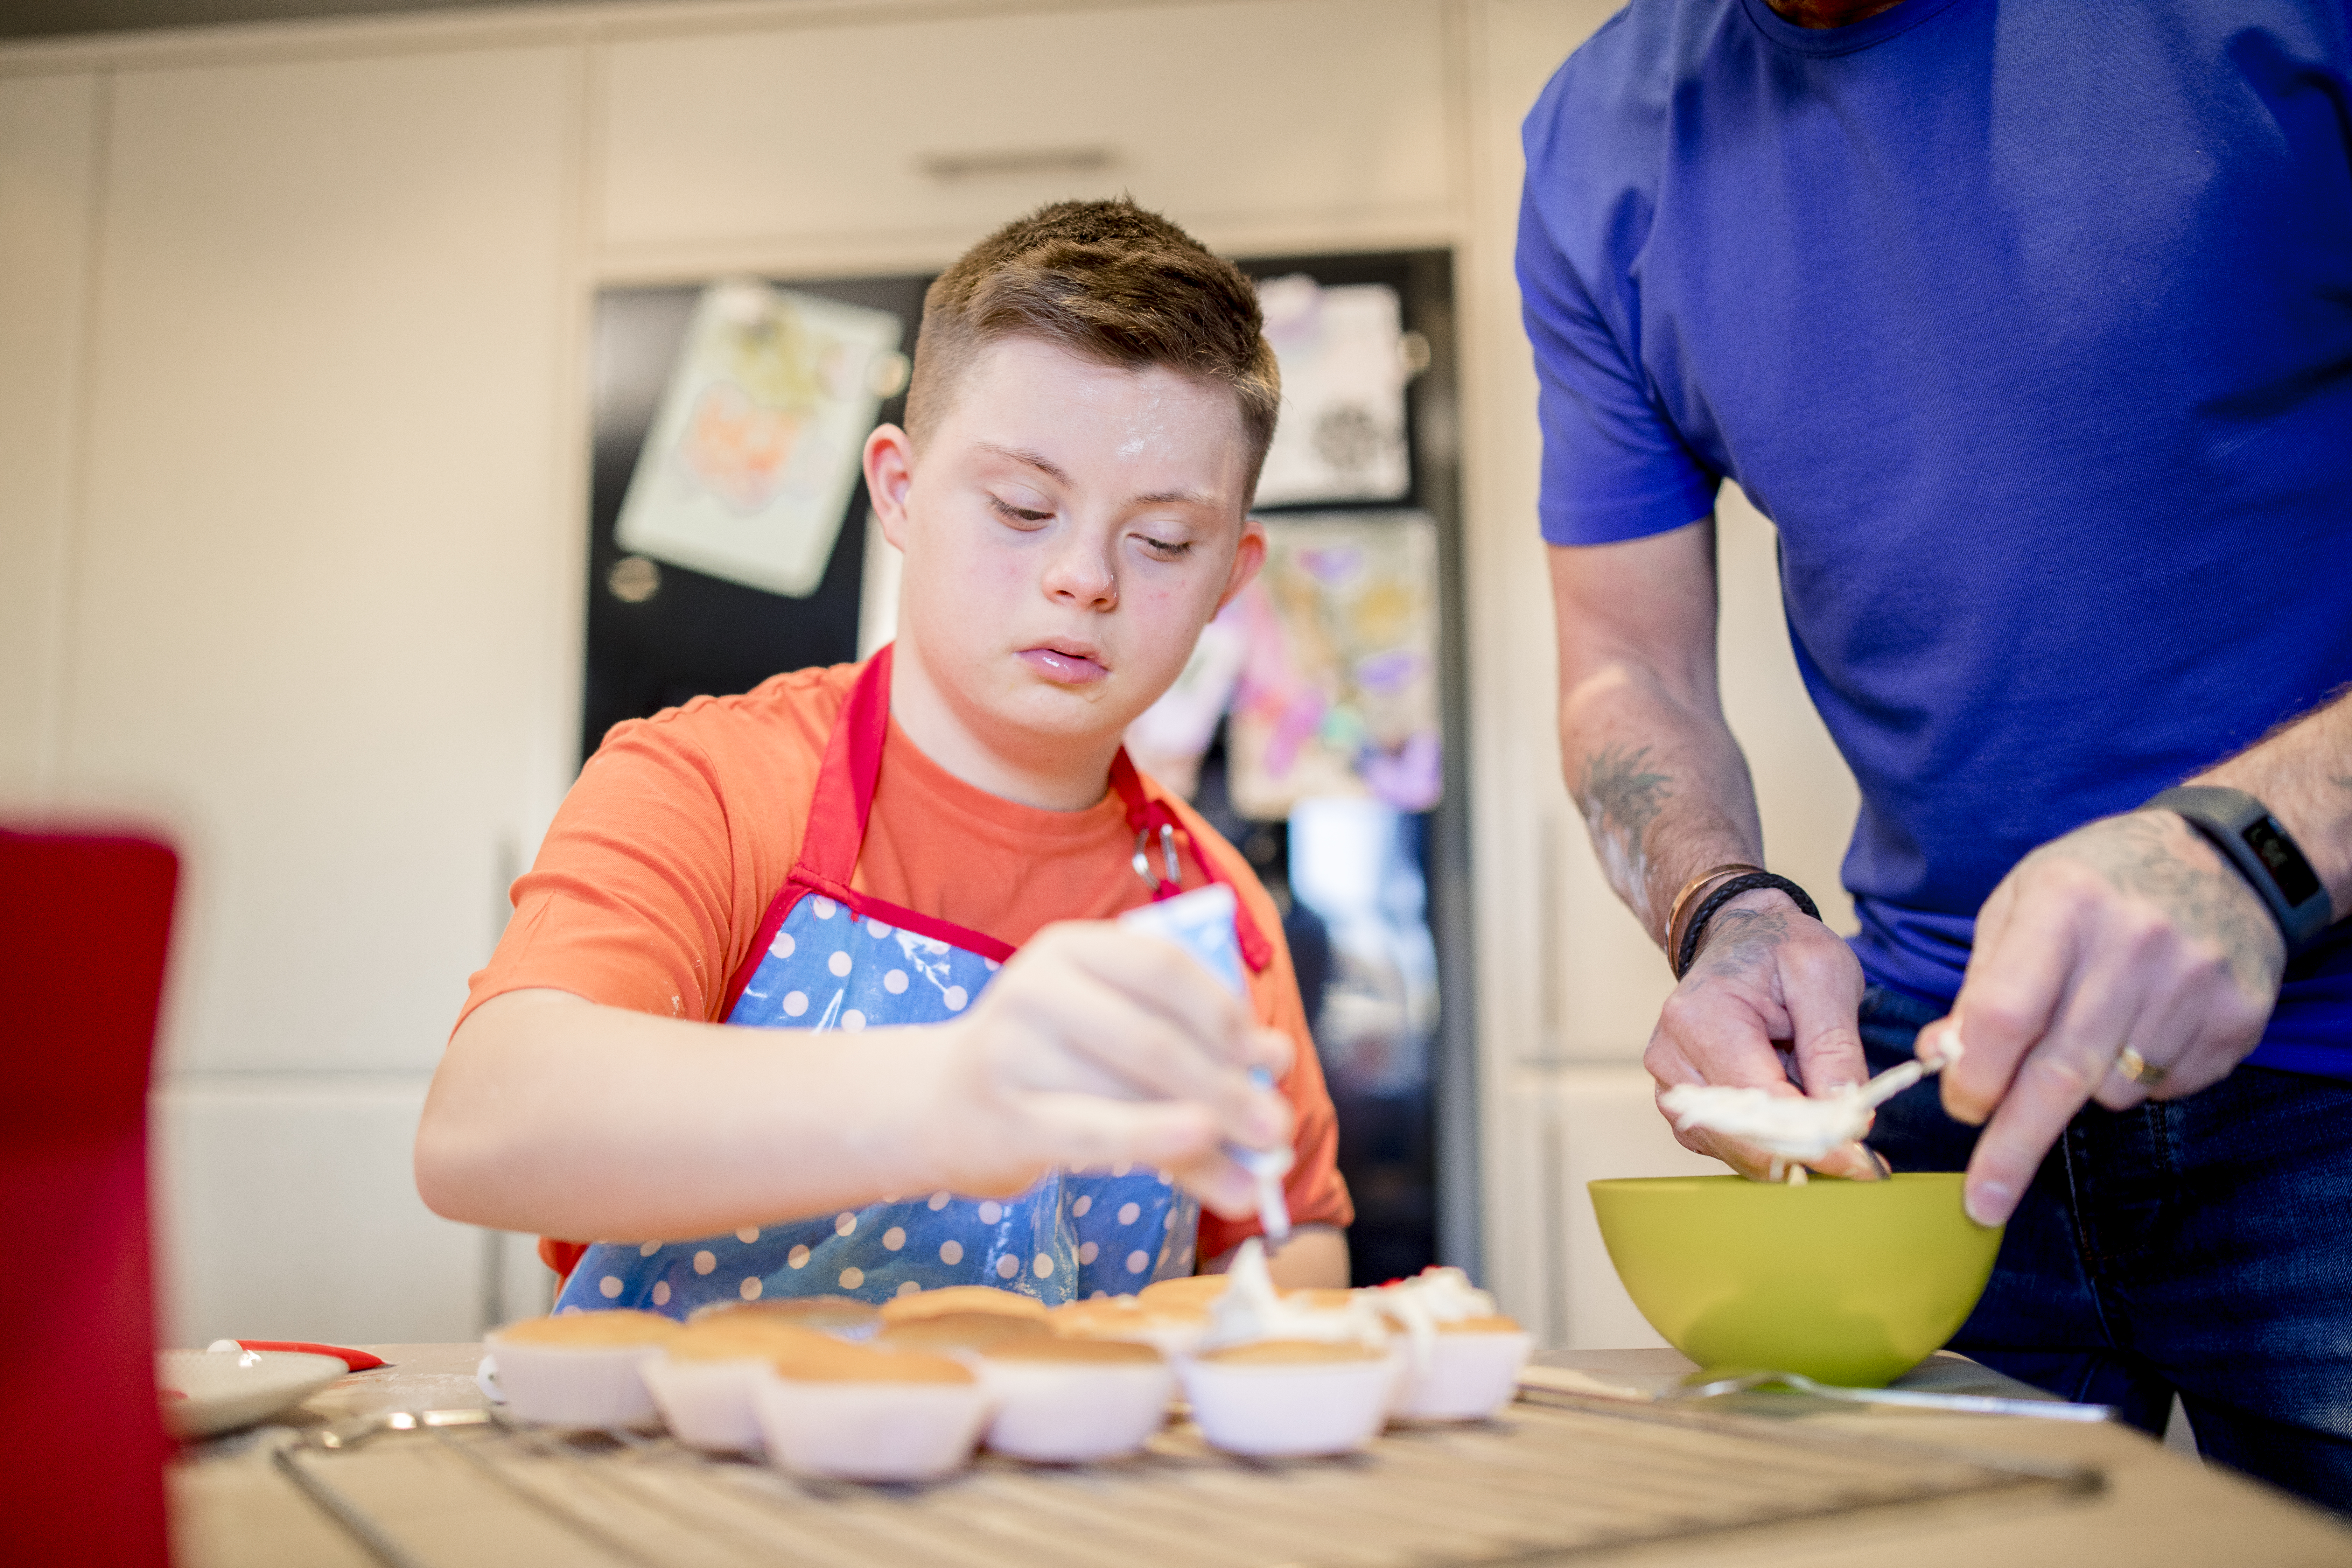 A boy with down syndrome bakes cakes with his father in the kitchen.